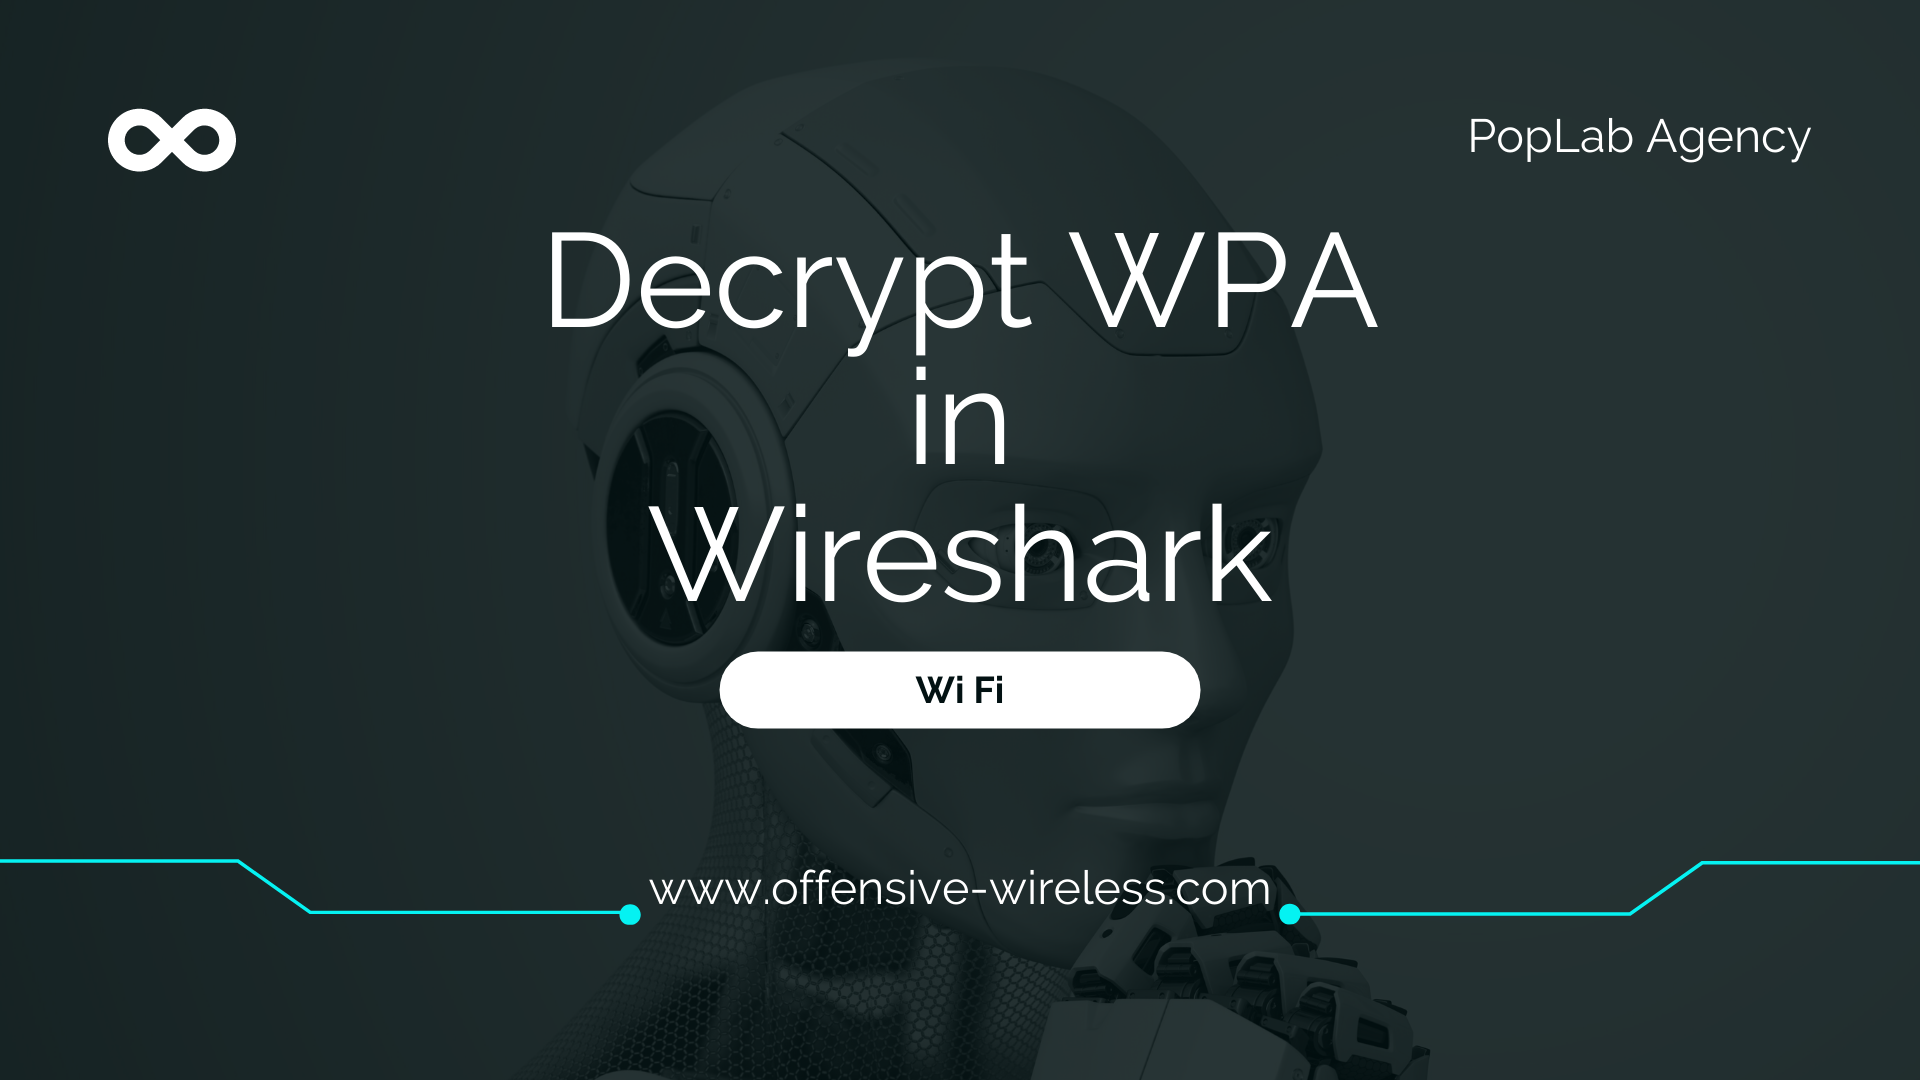 How to decrypt WPA traffic in Wireshark